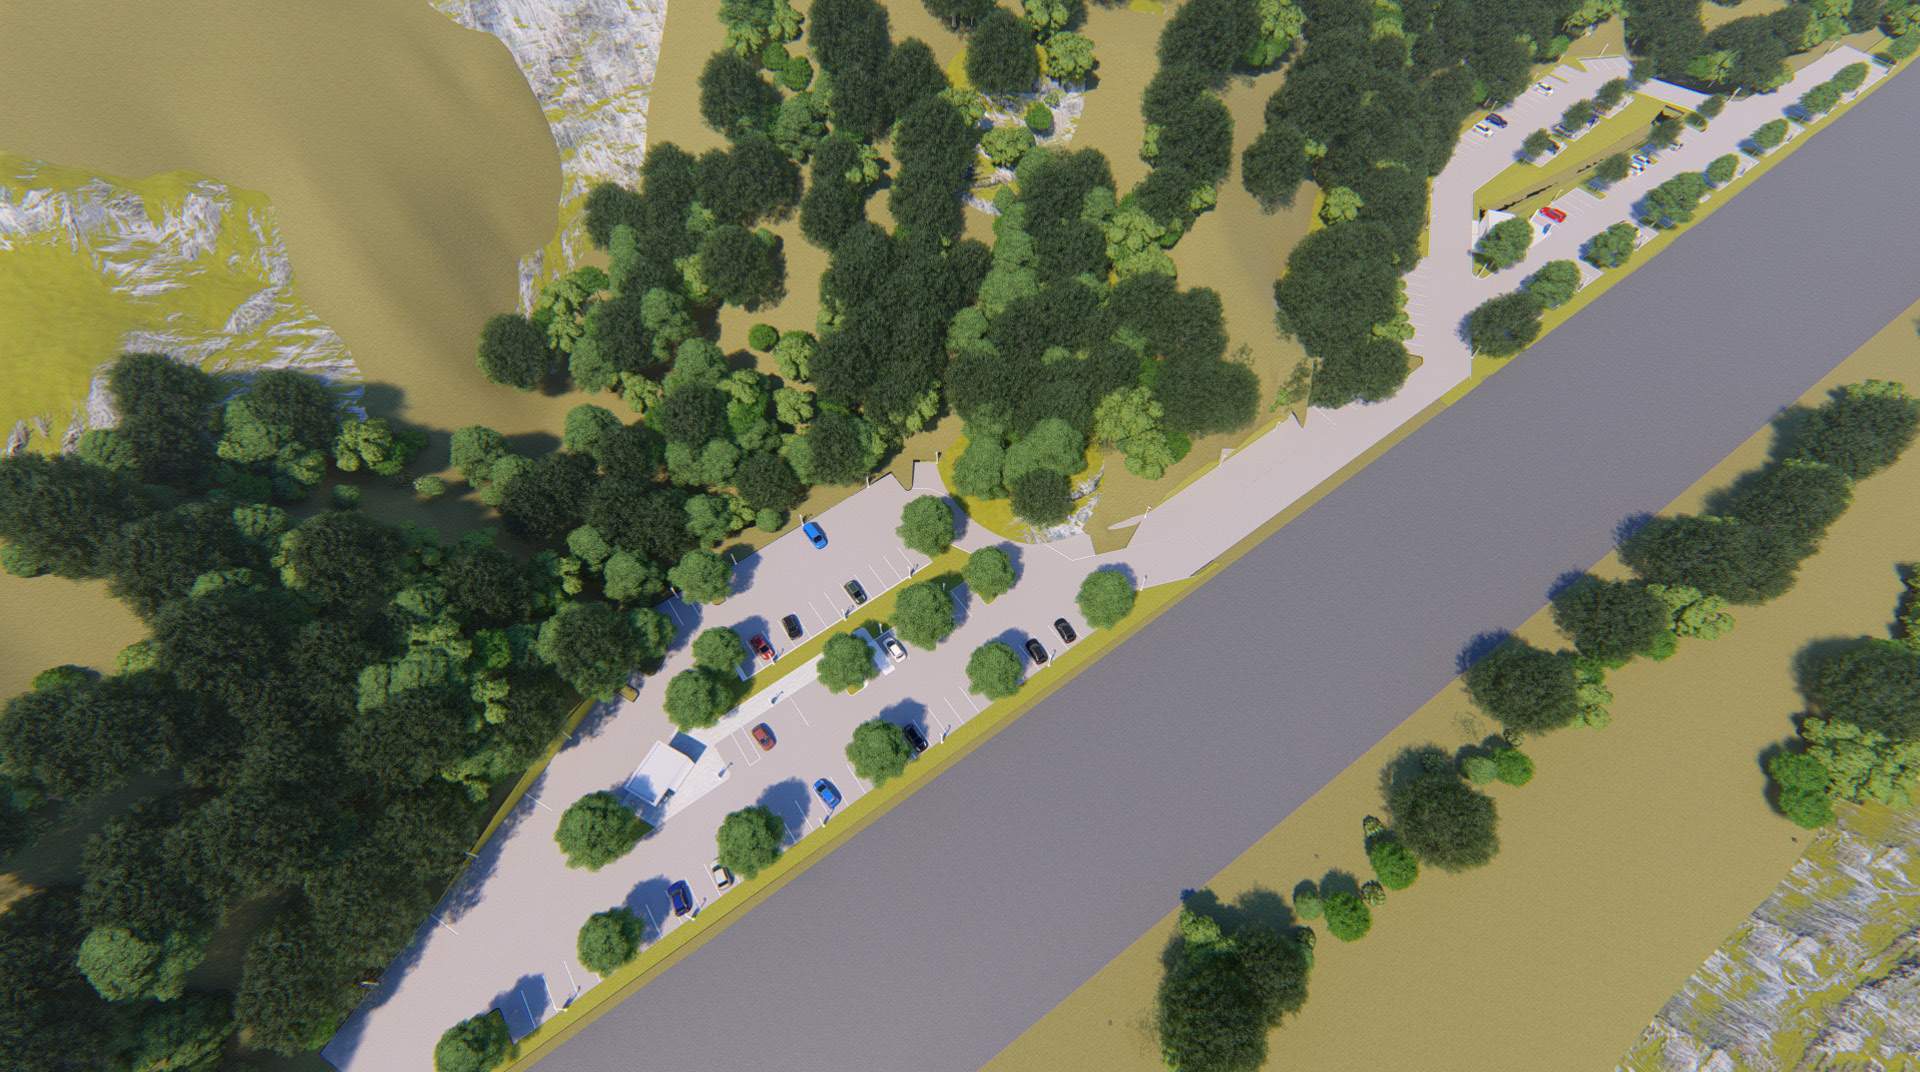 A computer rendering of a bird’s-eye view of the Oak Parking areas, showing the predominance of trees growing in the parking area and just adjacent to